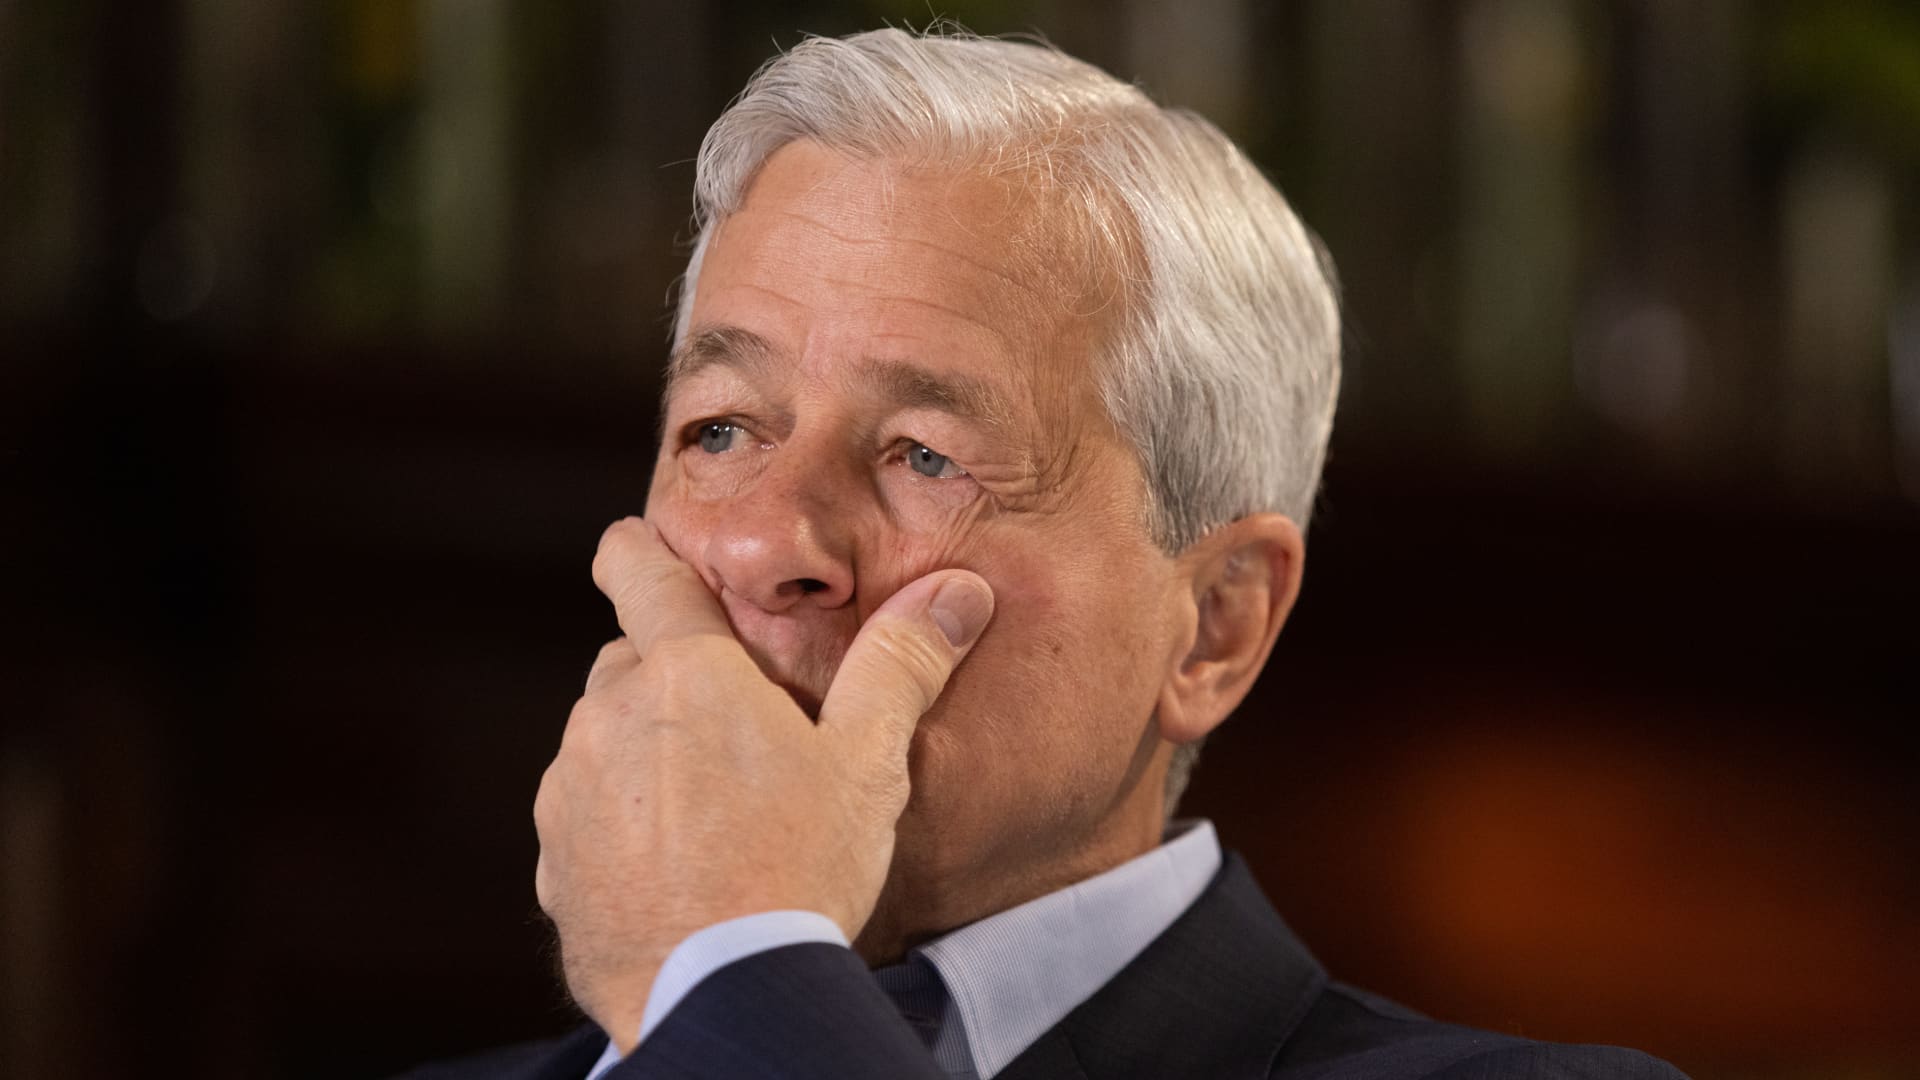 Jamie Dimon, chief executive officer of JPMorgan Chase & Co., during a Bloomberg Television interview in London, U.K., on Wednesday, May 4, 2022.